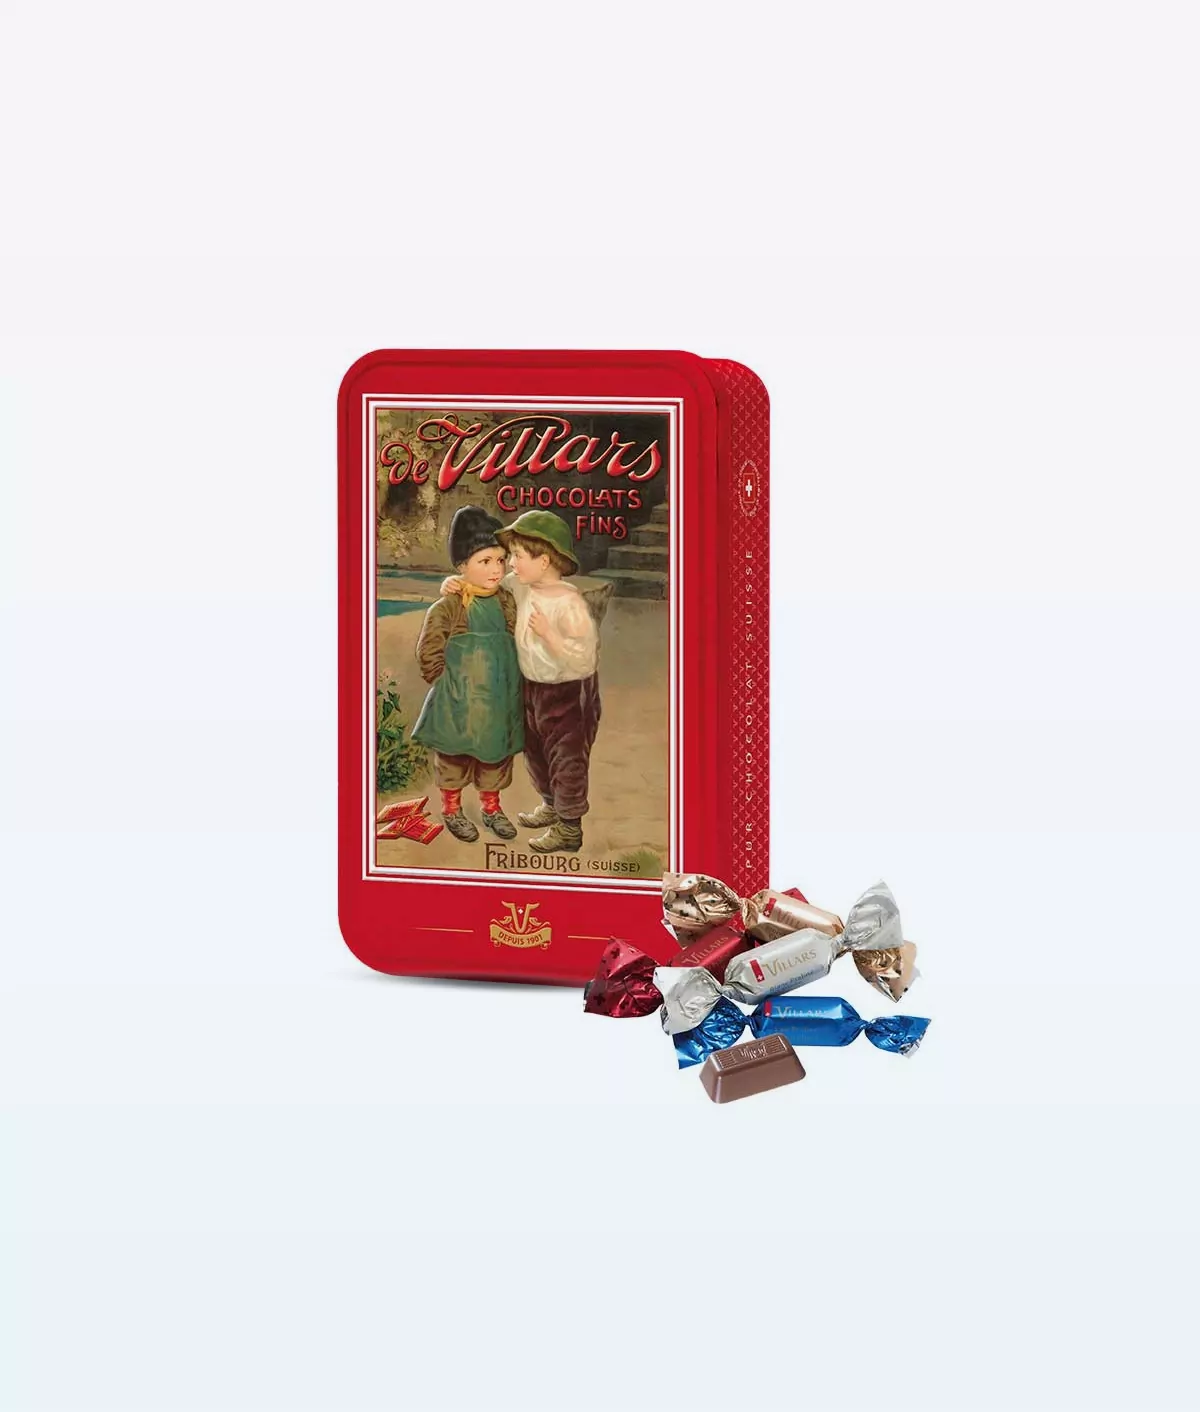 Red Villars Chocolate Box Les Enfants 250g tin, featuring child-themed imagery.